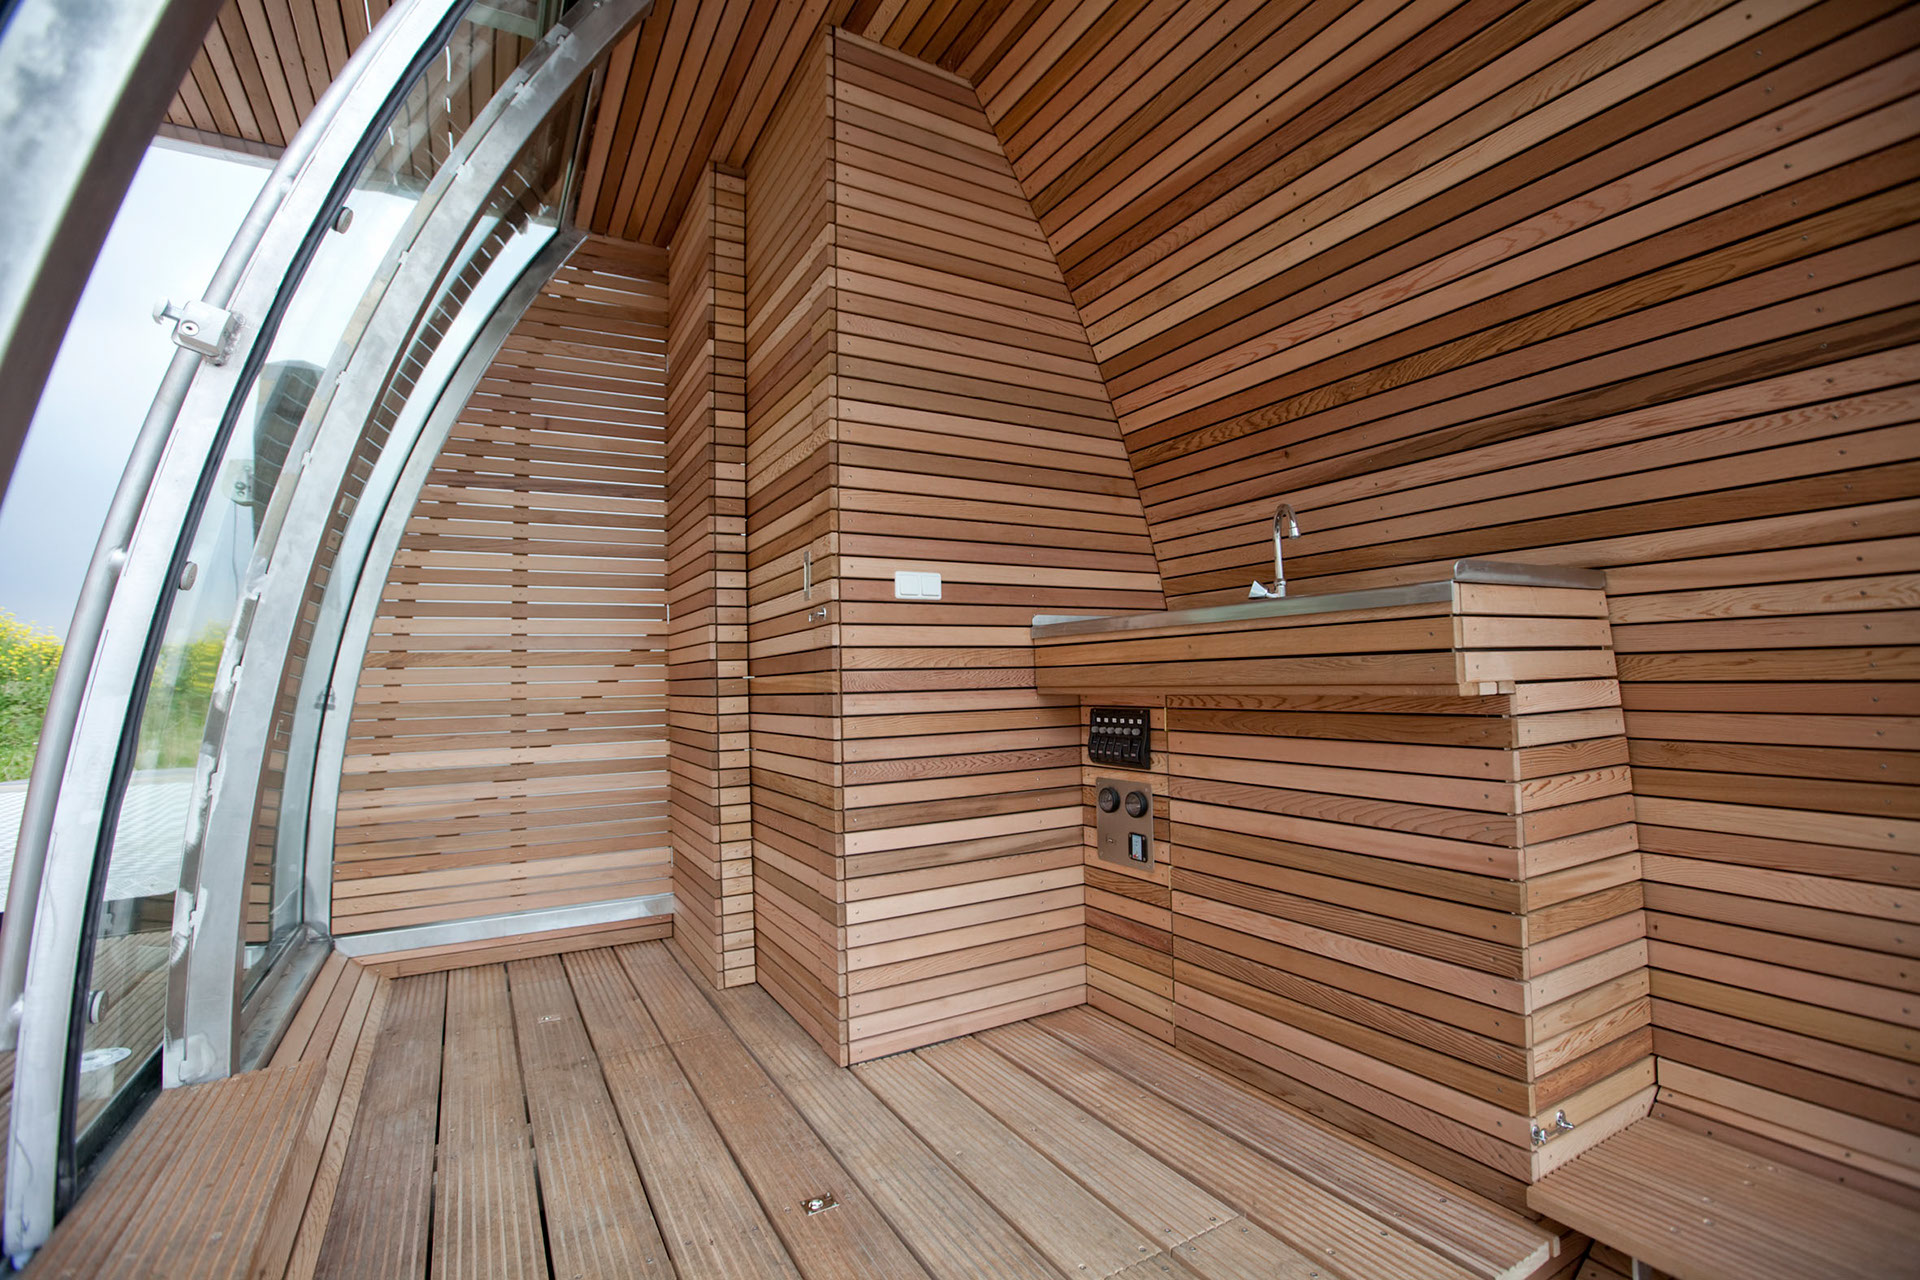 Wood-lined floating cabin